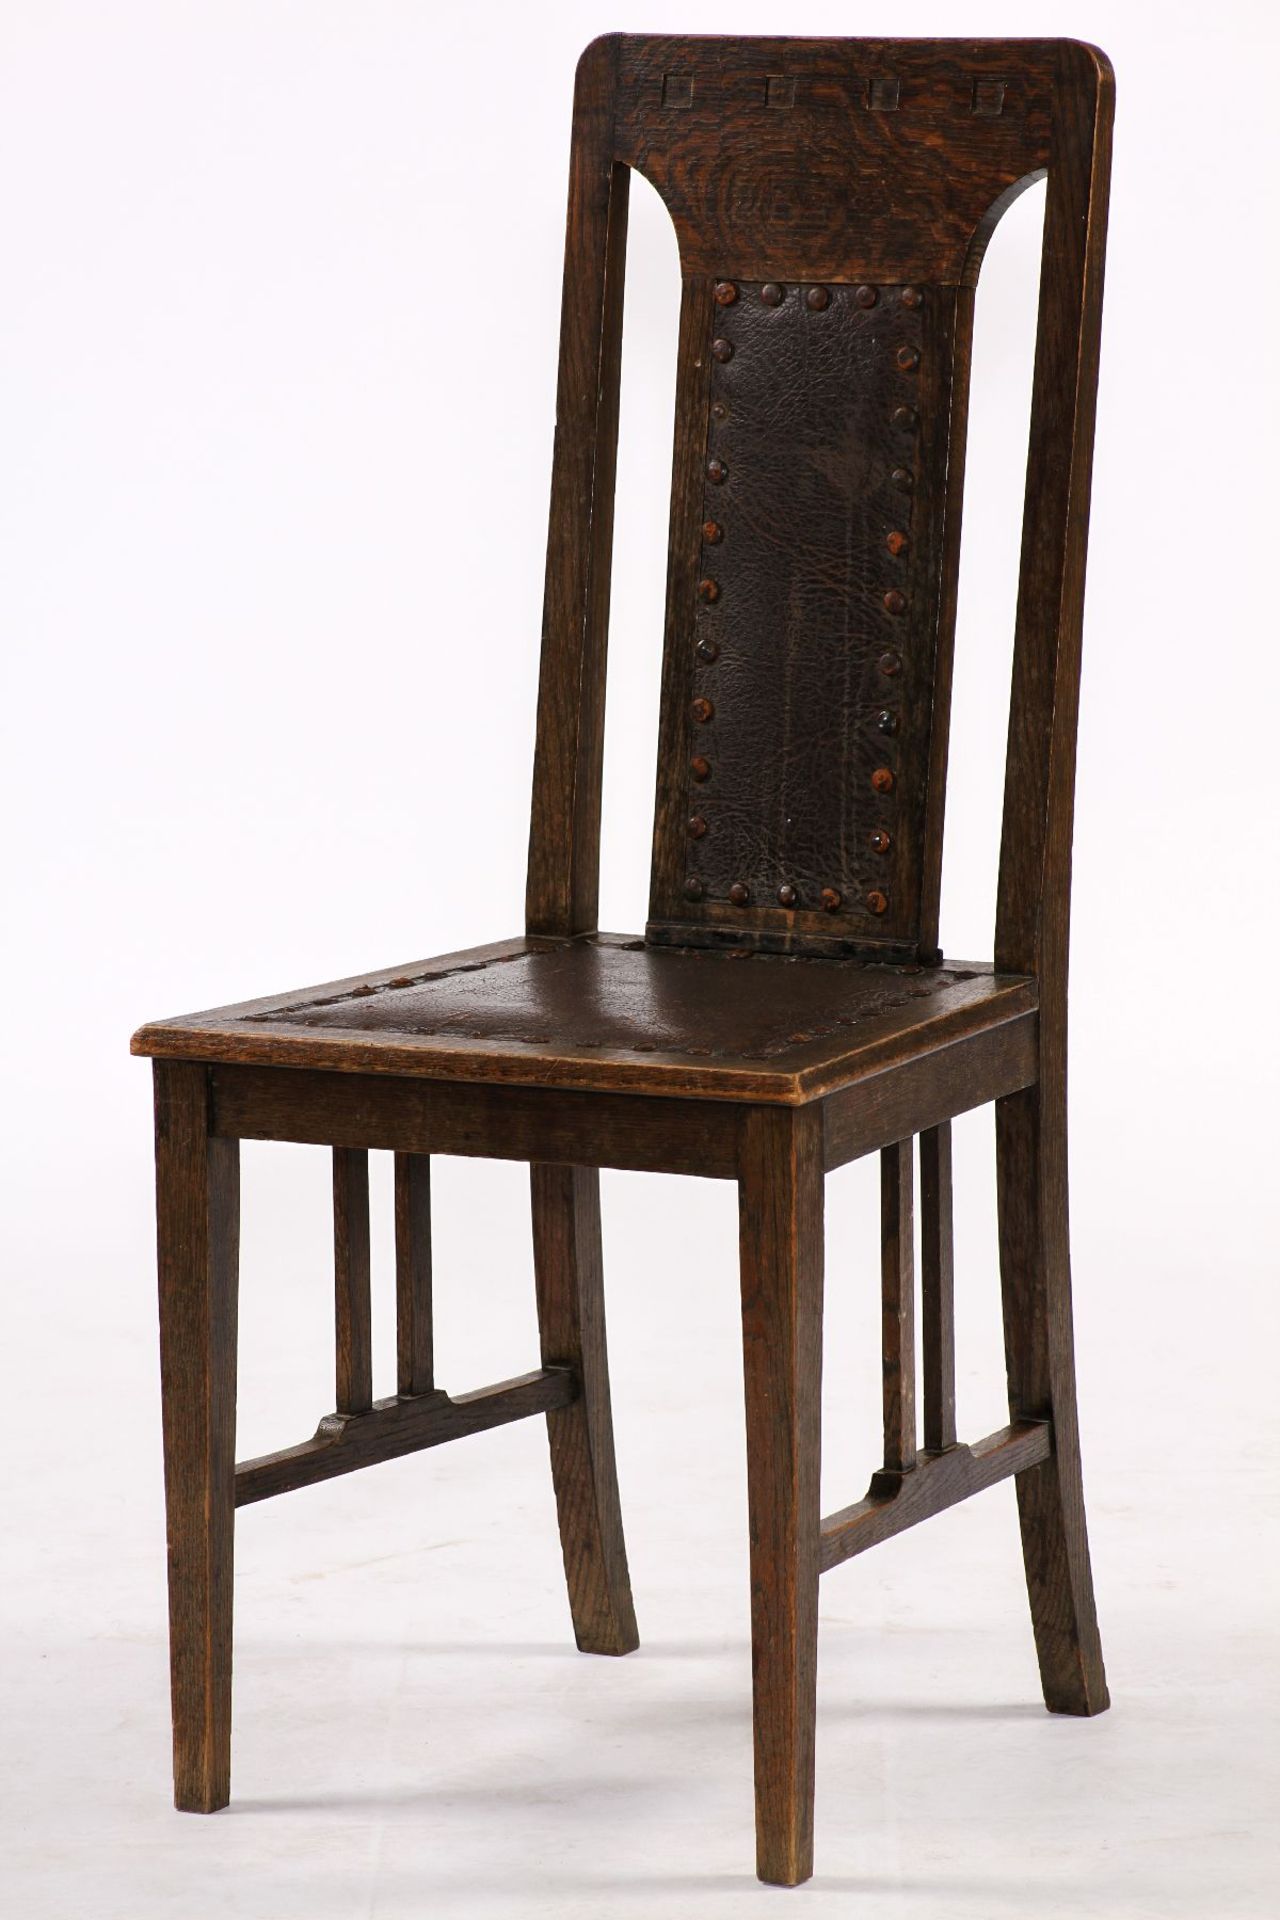 Chair, German, around 1905, pure abstract Art Nouveau, under the great influence of Riemerschmid ( - Image 2 of 3